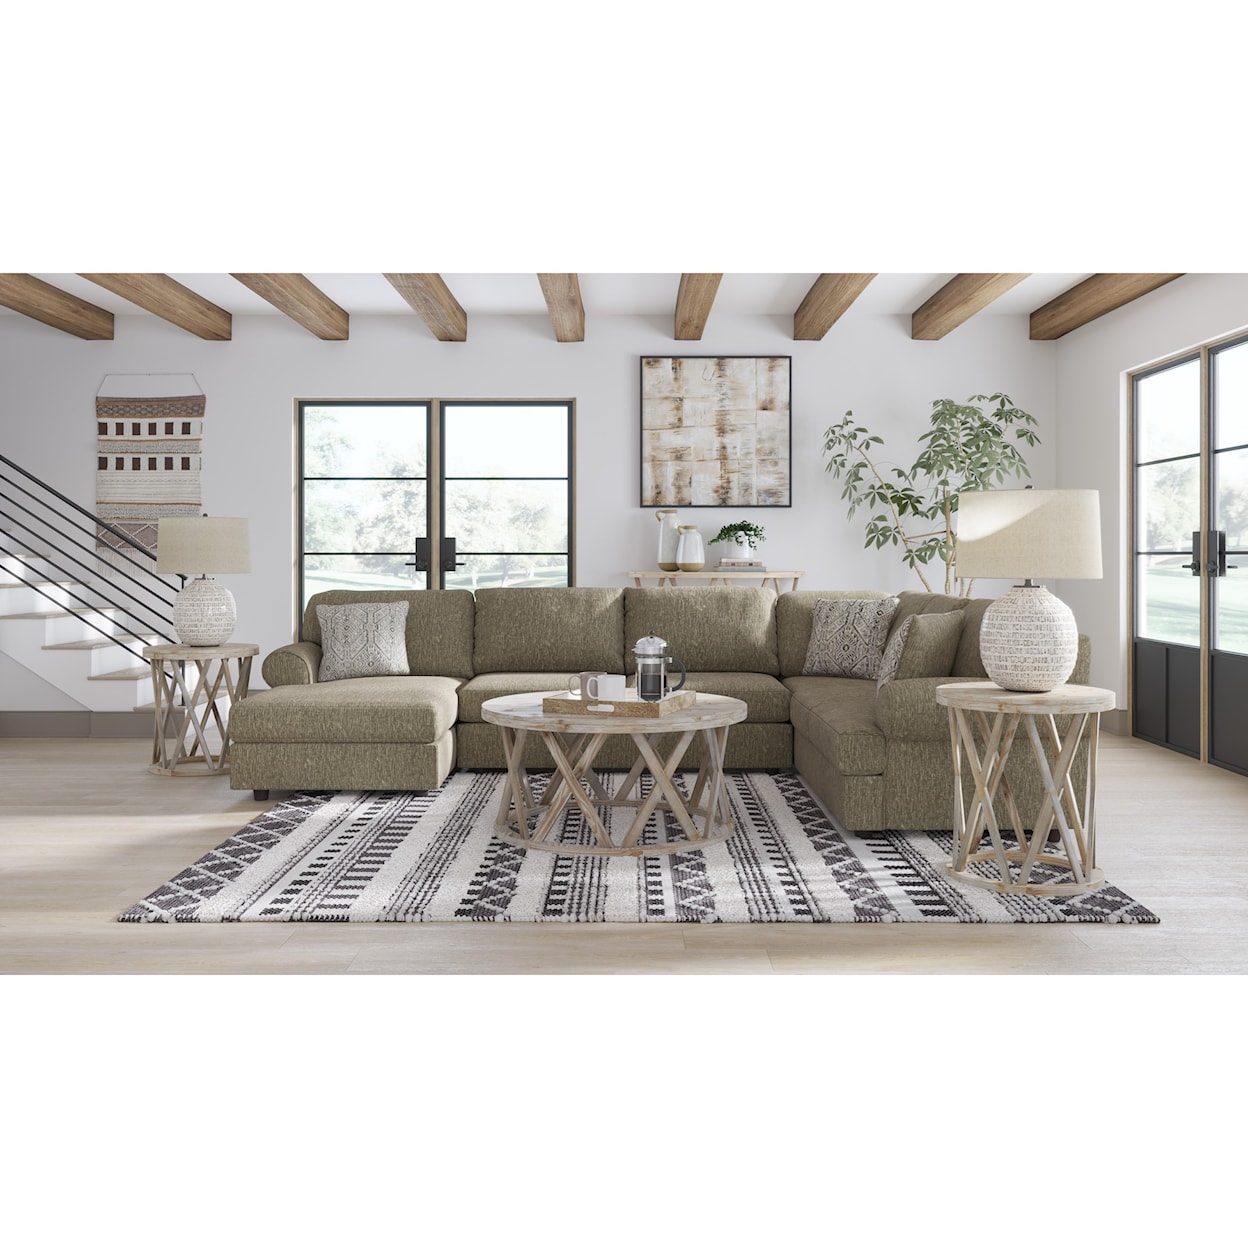 Signature Design Hoylake 3-Piece Sectional with Chaise